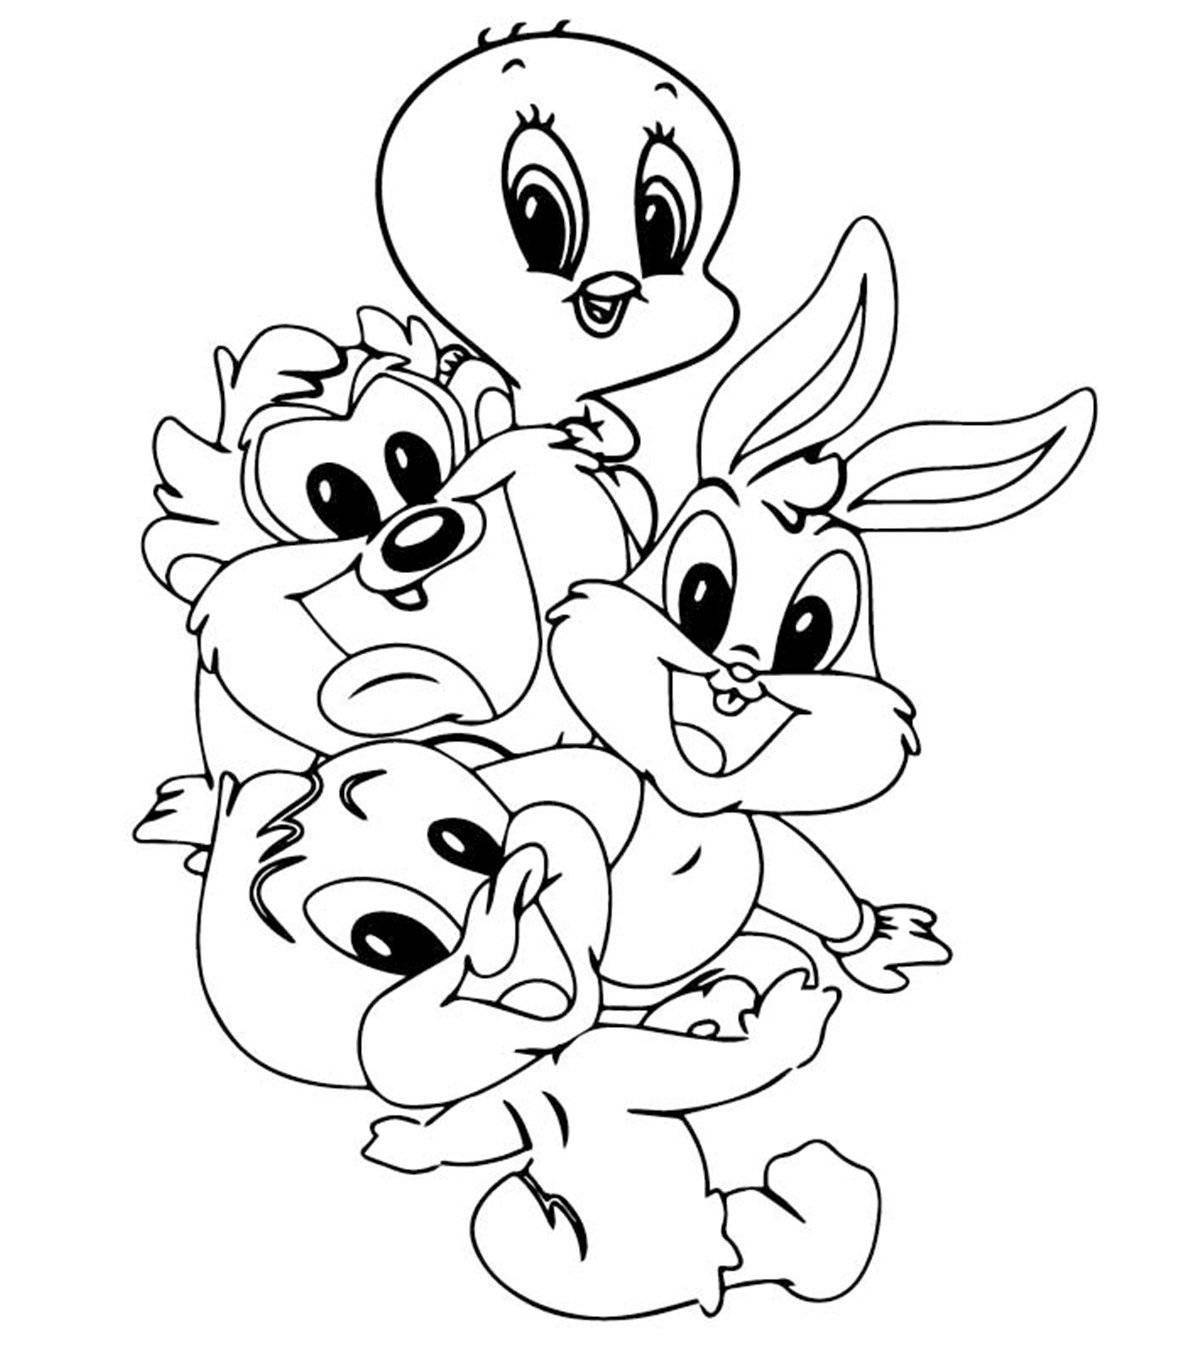 Coloring book adorable cartoon characters for kids